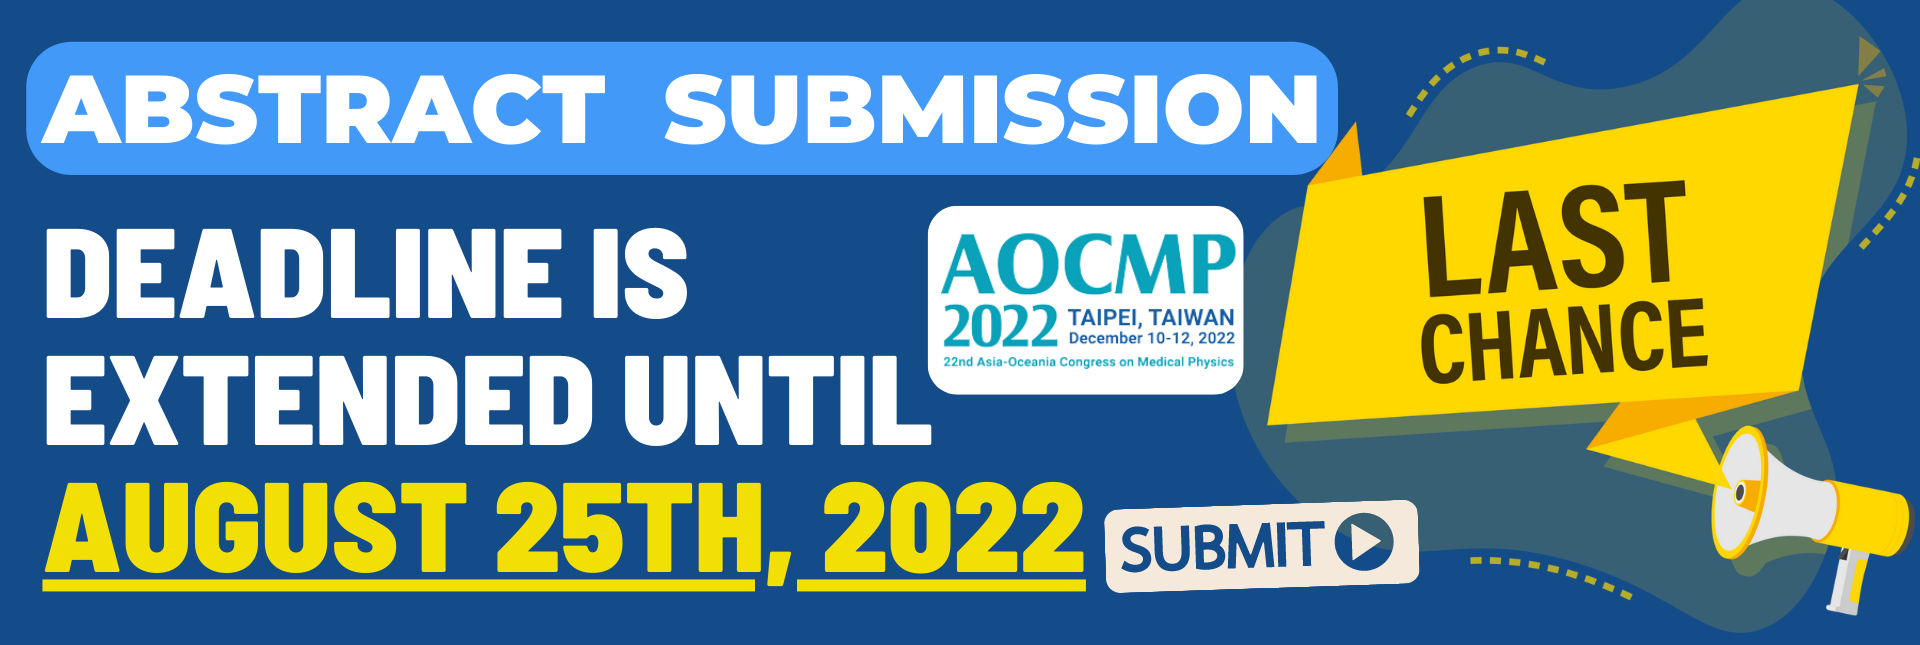 AOCMP 2022, Taipei calls for Abstracts ! Submit before Aug 25th, 2022